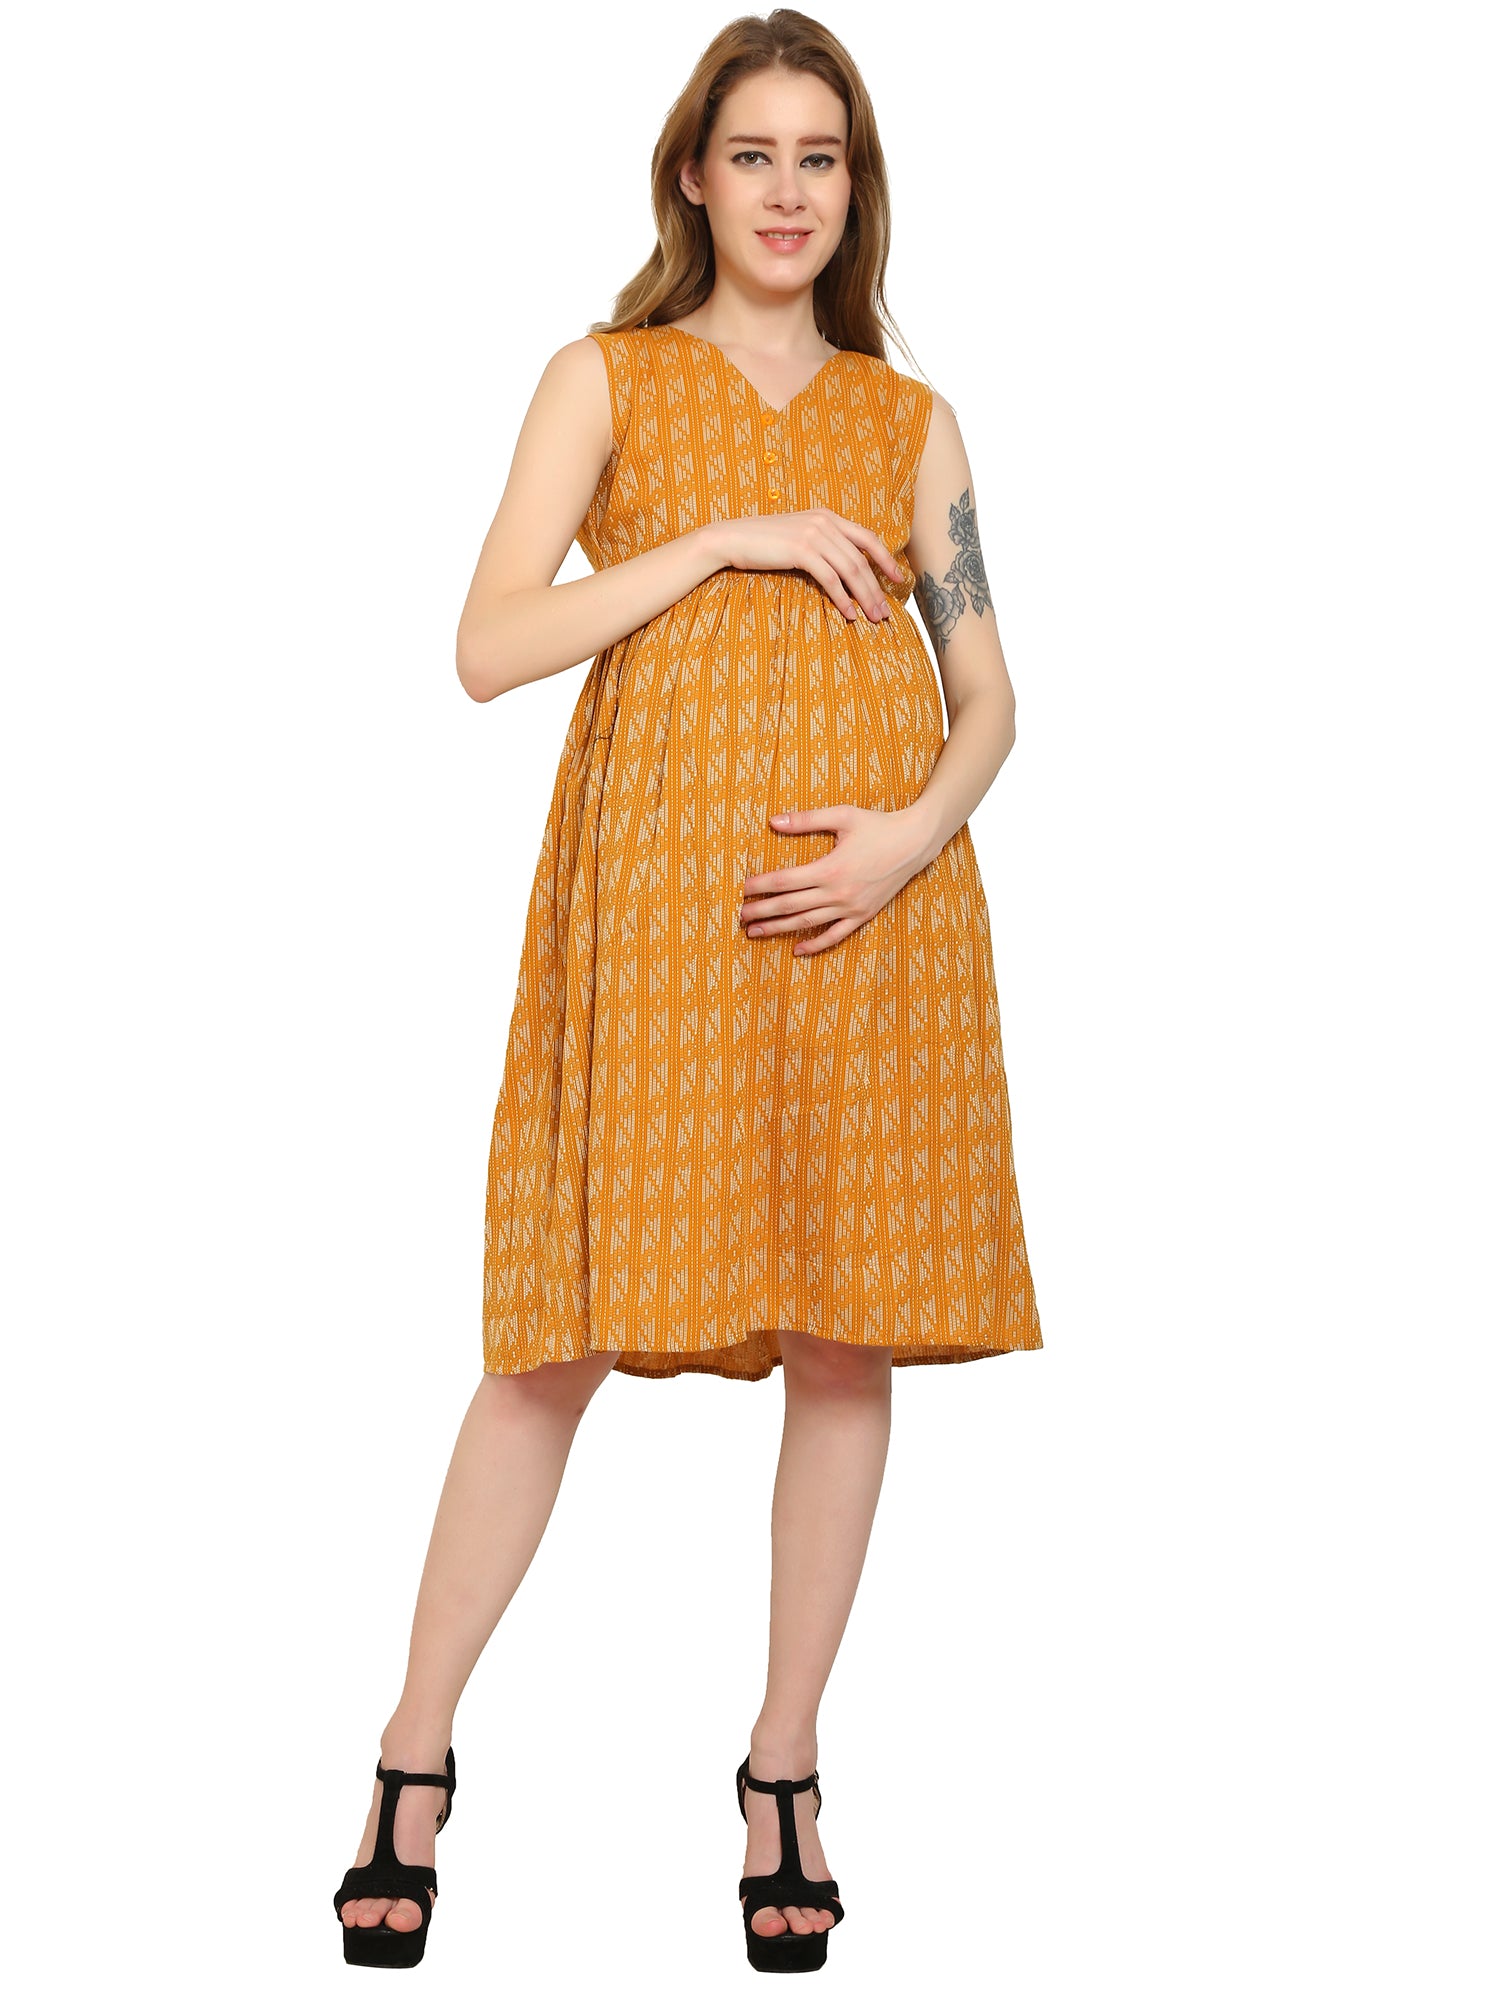 24+ Amazing Photo of Independent Sewing Patterns - figswoodfiredbistro.com  | Maternity sewing patterns, Maternity sewing, Indie sewing patterns